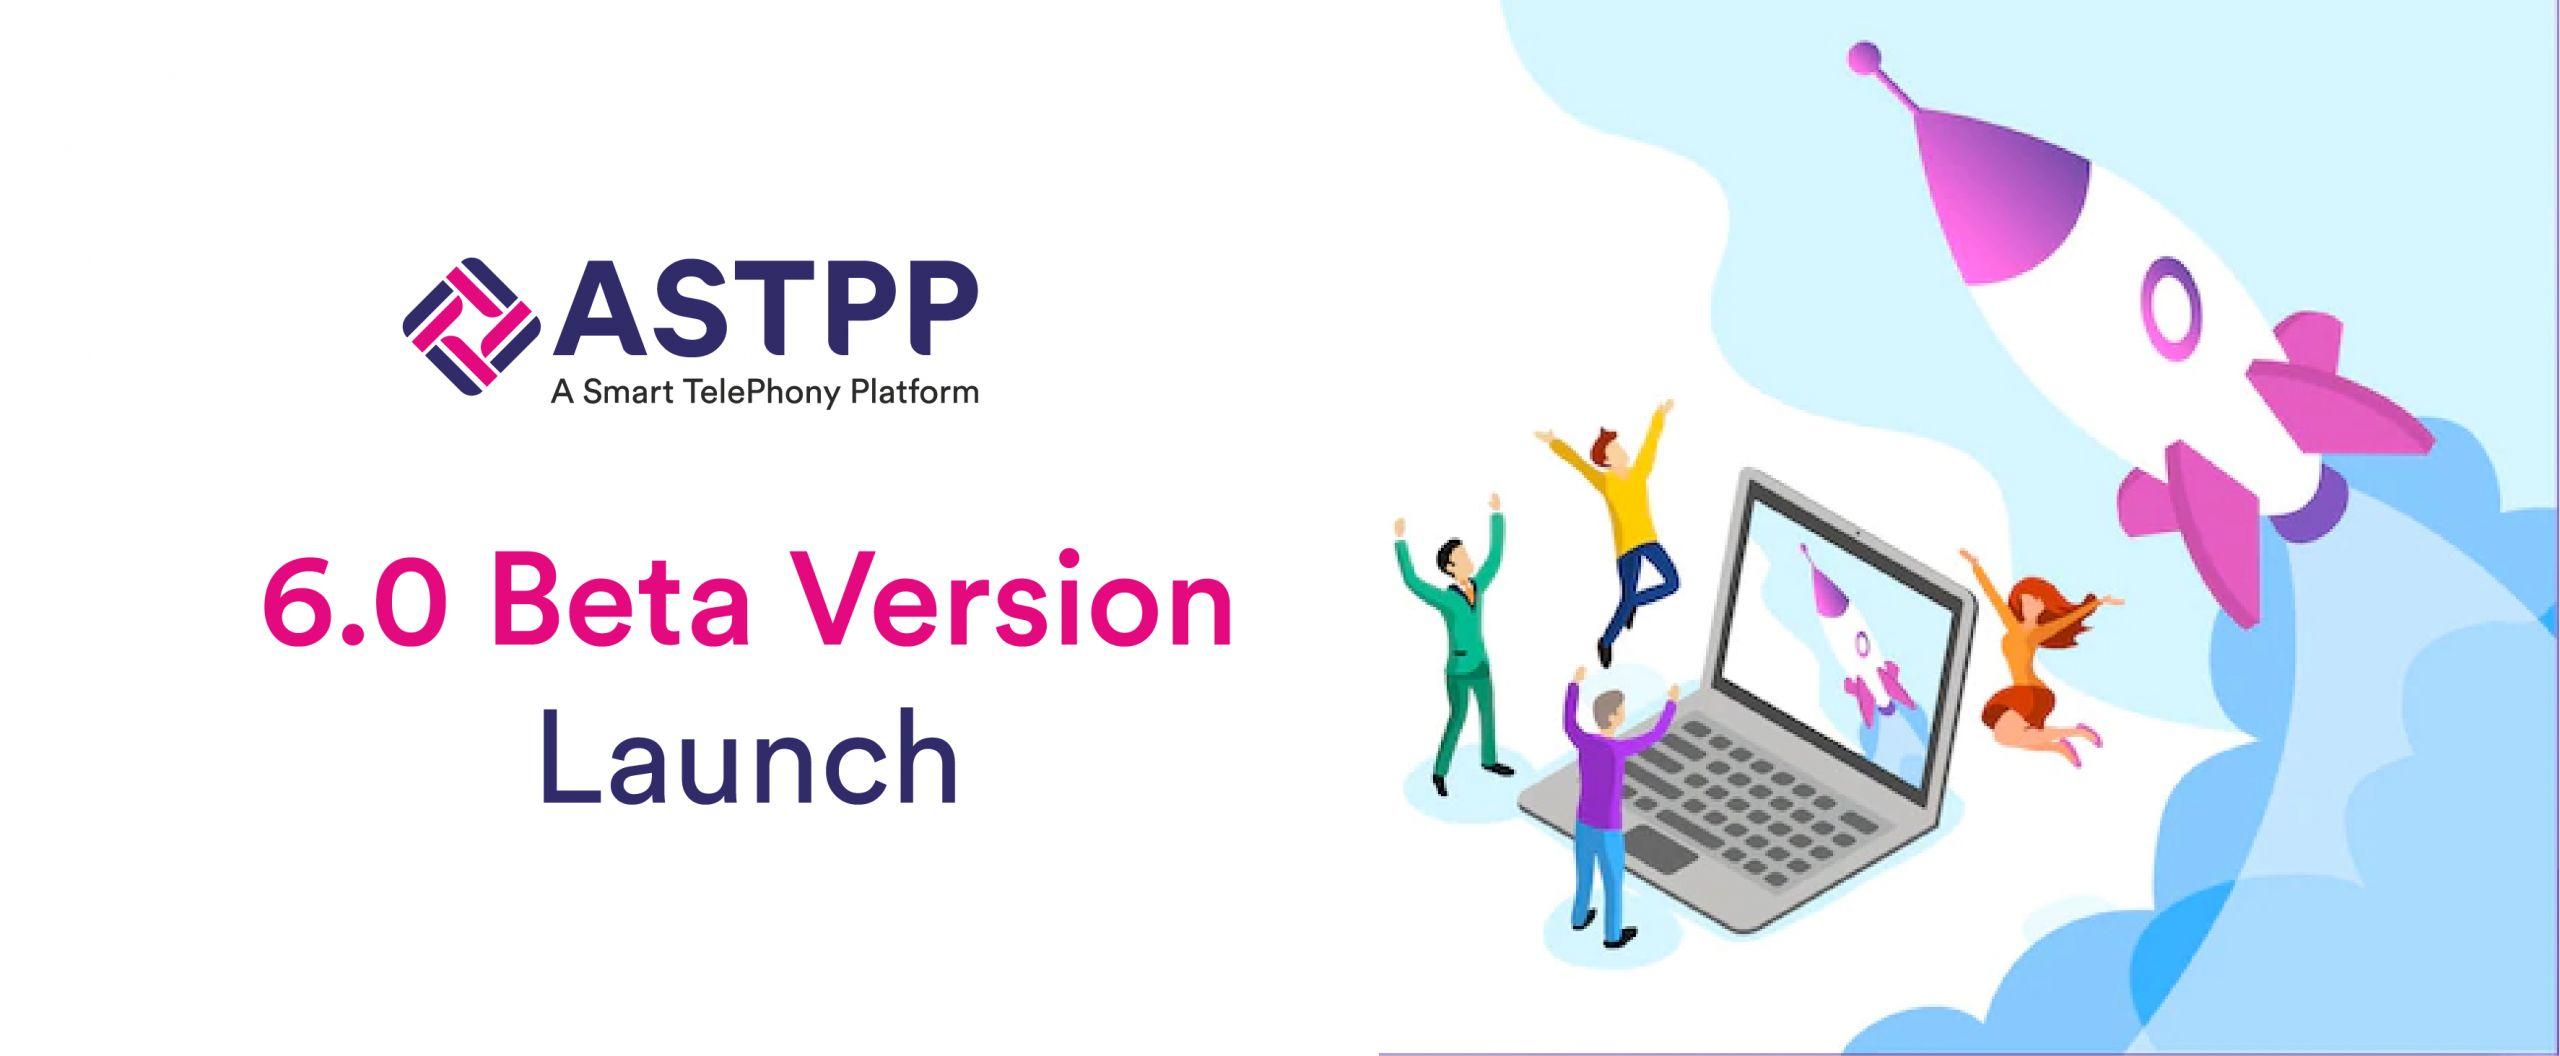 ASTPP Beta Version 6.0 Launched: Join the Group of Beta Testers